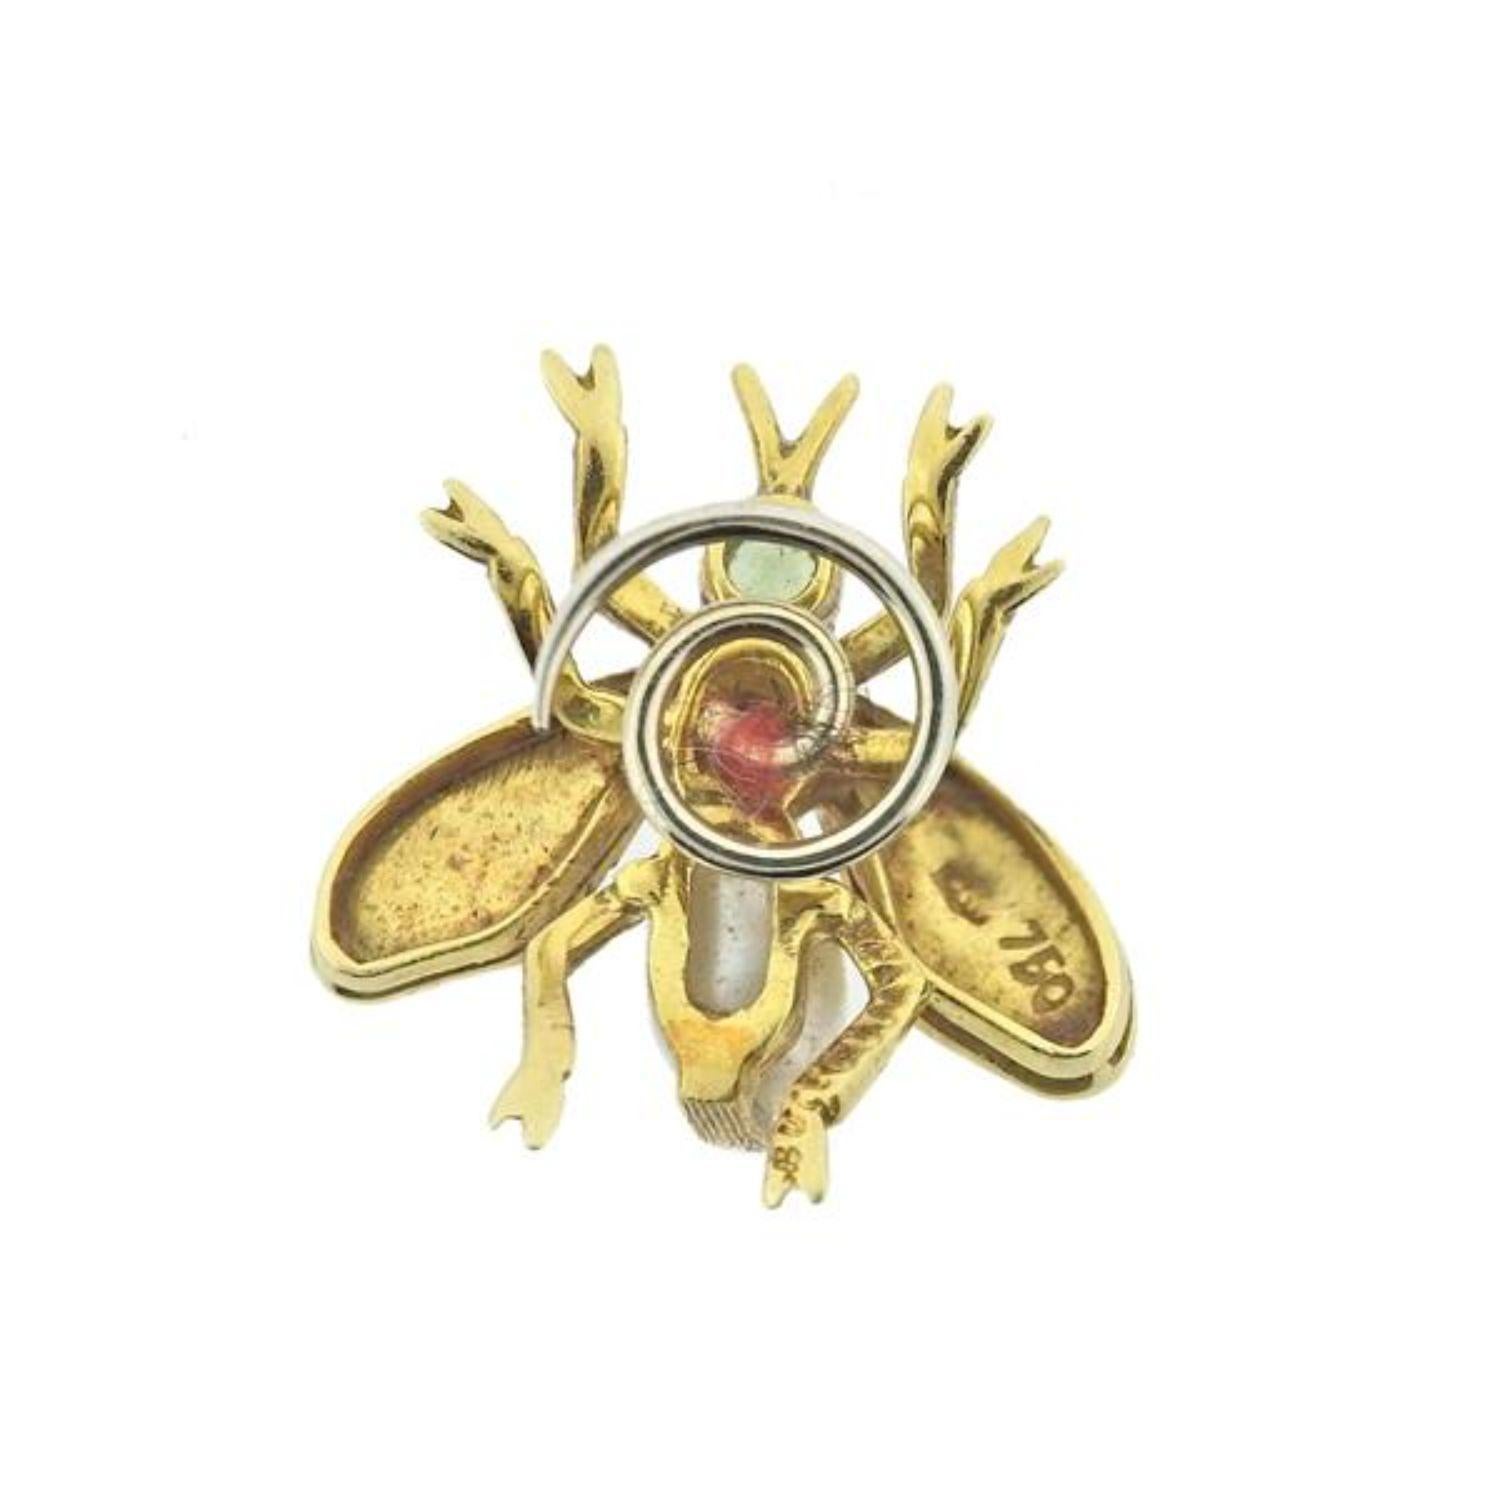 Beautiful 18k gold Buccellati Gold Insect with Pearl, Ruby and Enamel gemstones, signed Buccellati. What a unique piece for your collection! 

MEASUREMENTS: Pin is 16mm x 18mm

MARKED: Buccellati 750

WEIGHT: 2.4 grams

Authenticity Guarantee: All